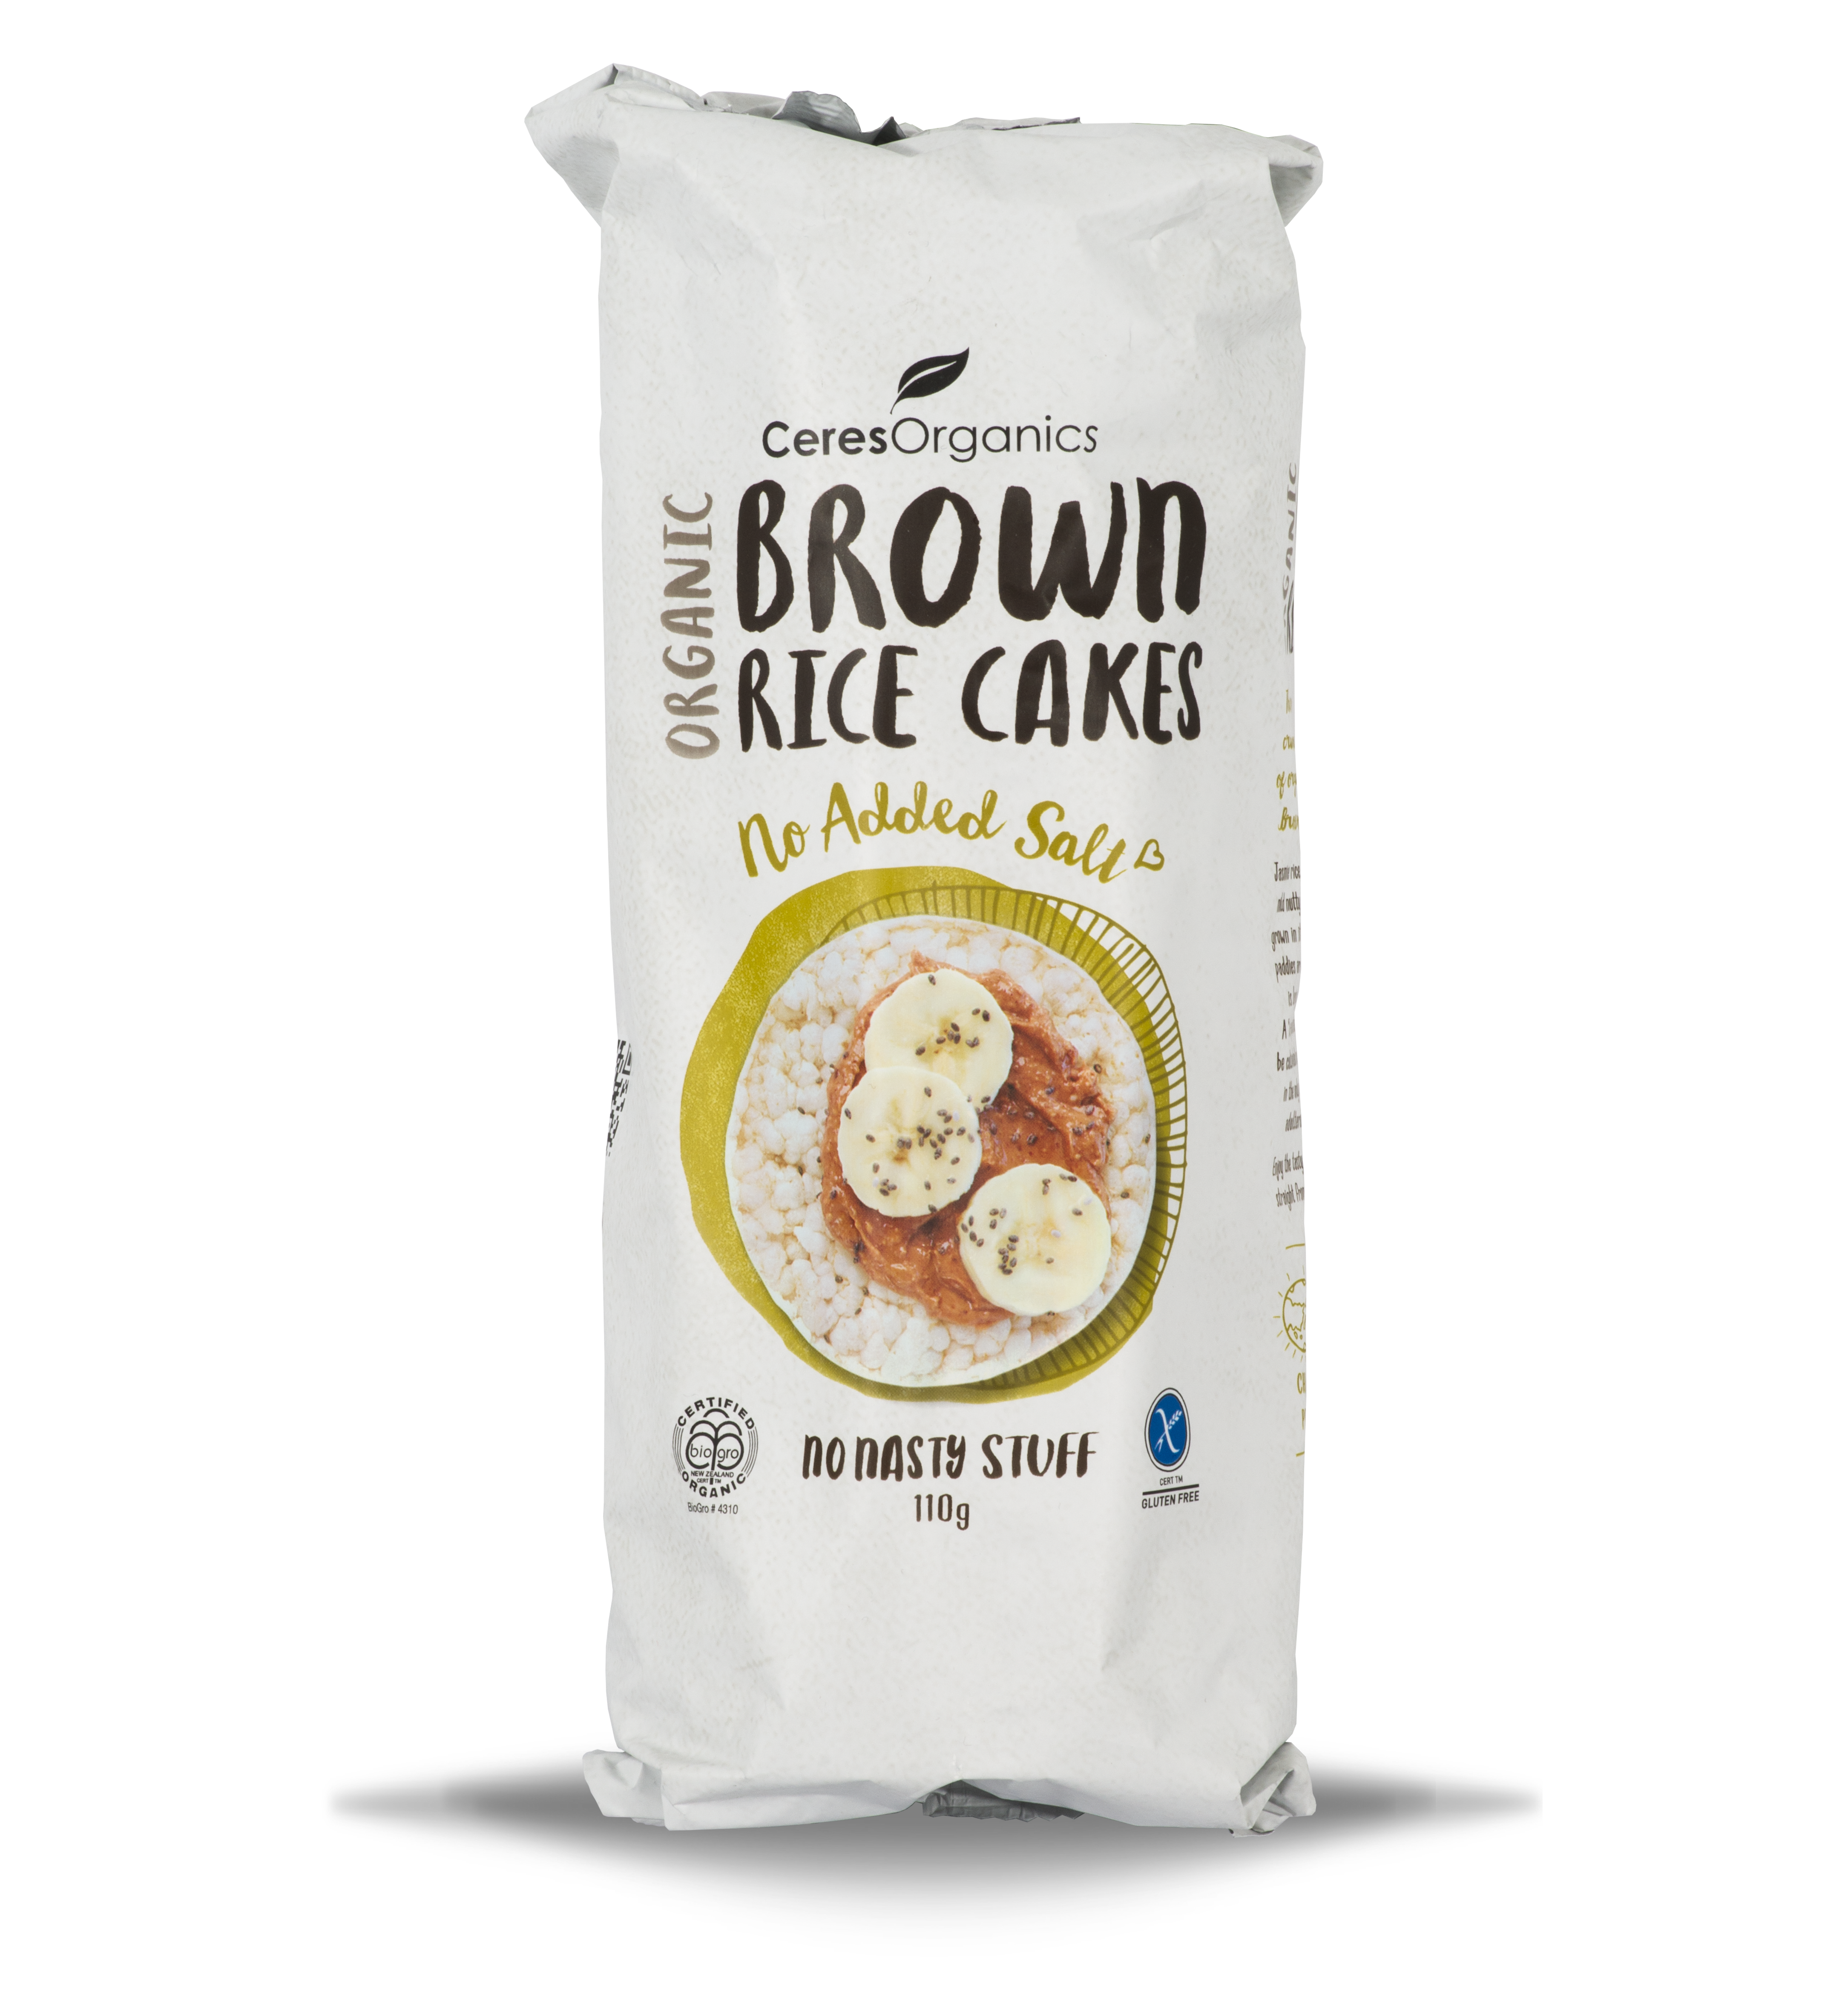 Buy Sunrice Thin Rice Cakes Original online at countdown.co.nz